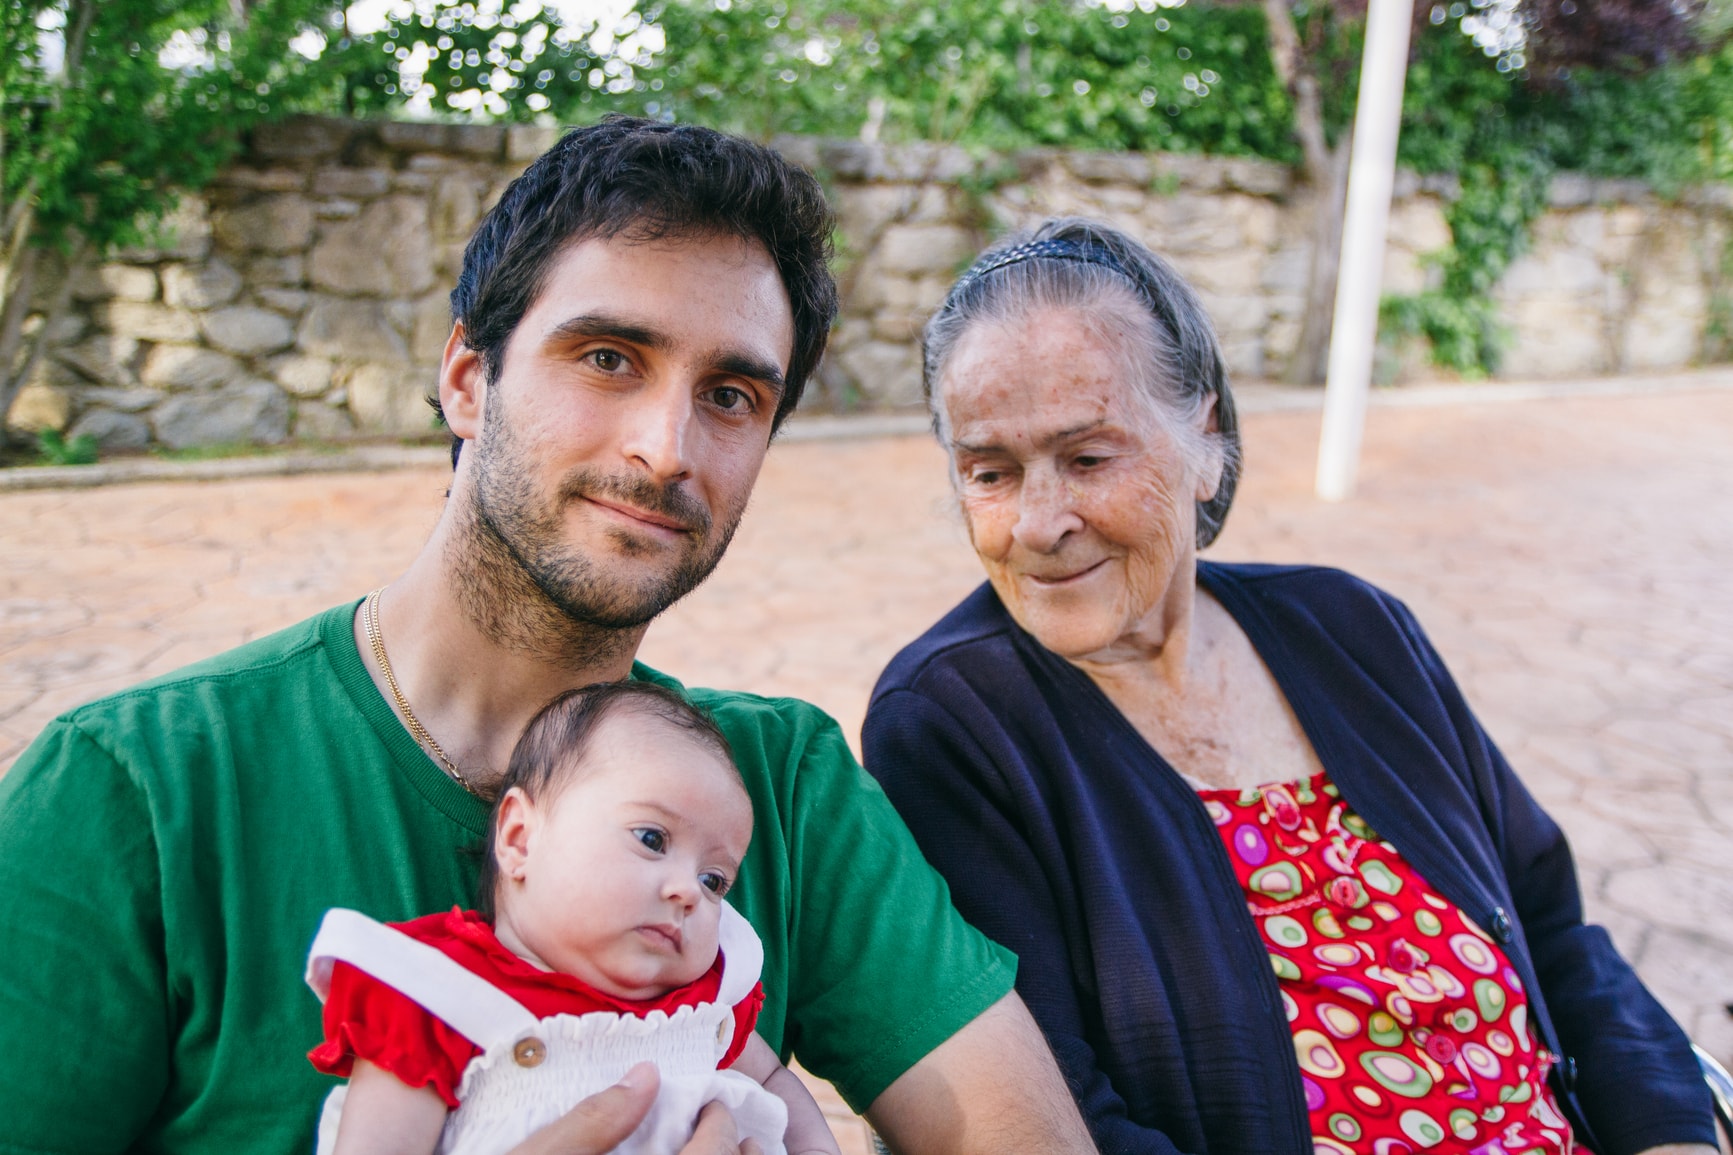 man holding a baby with elderly woman next to him